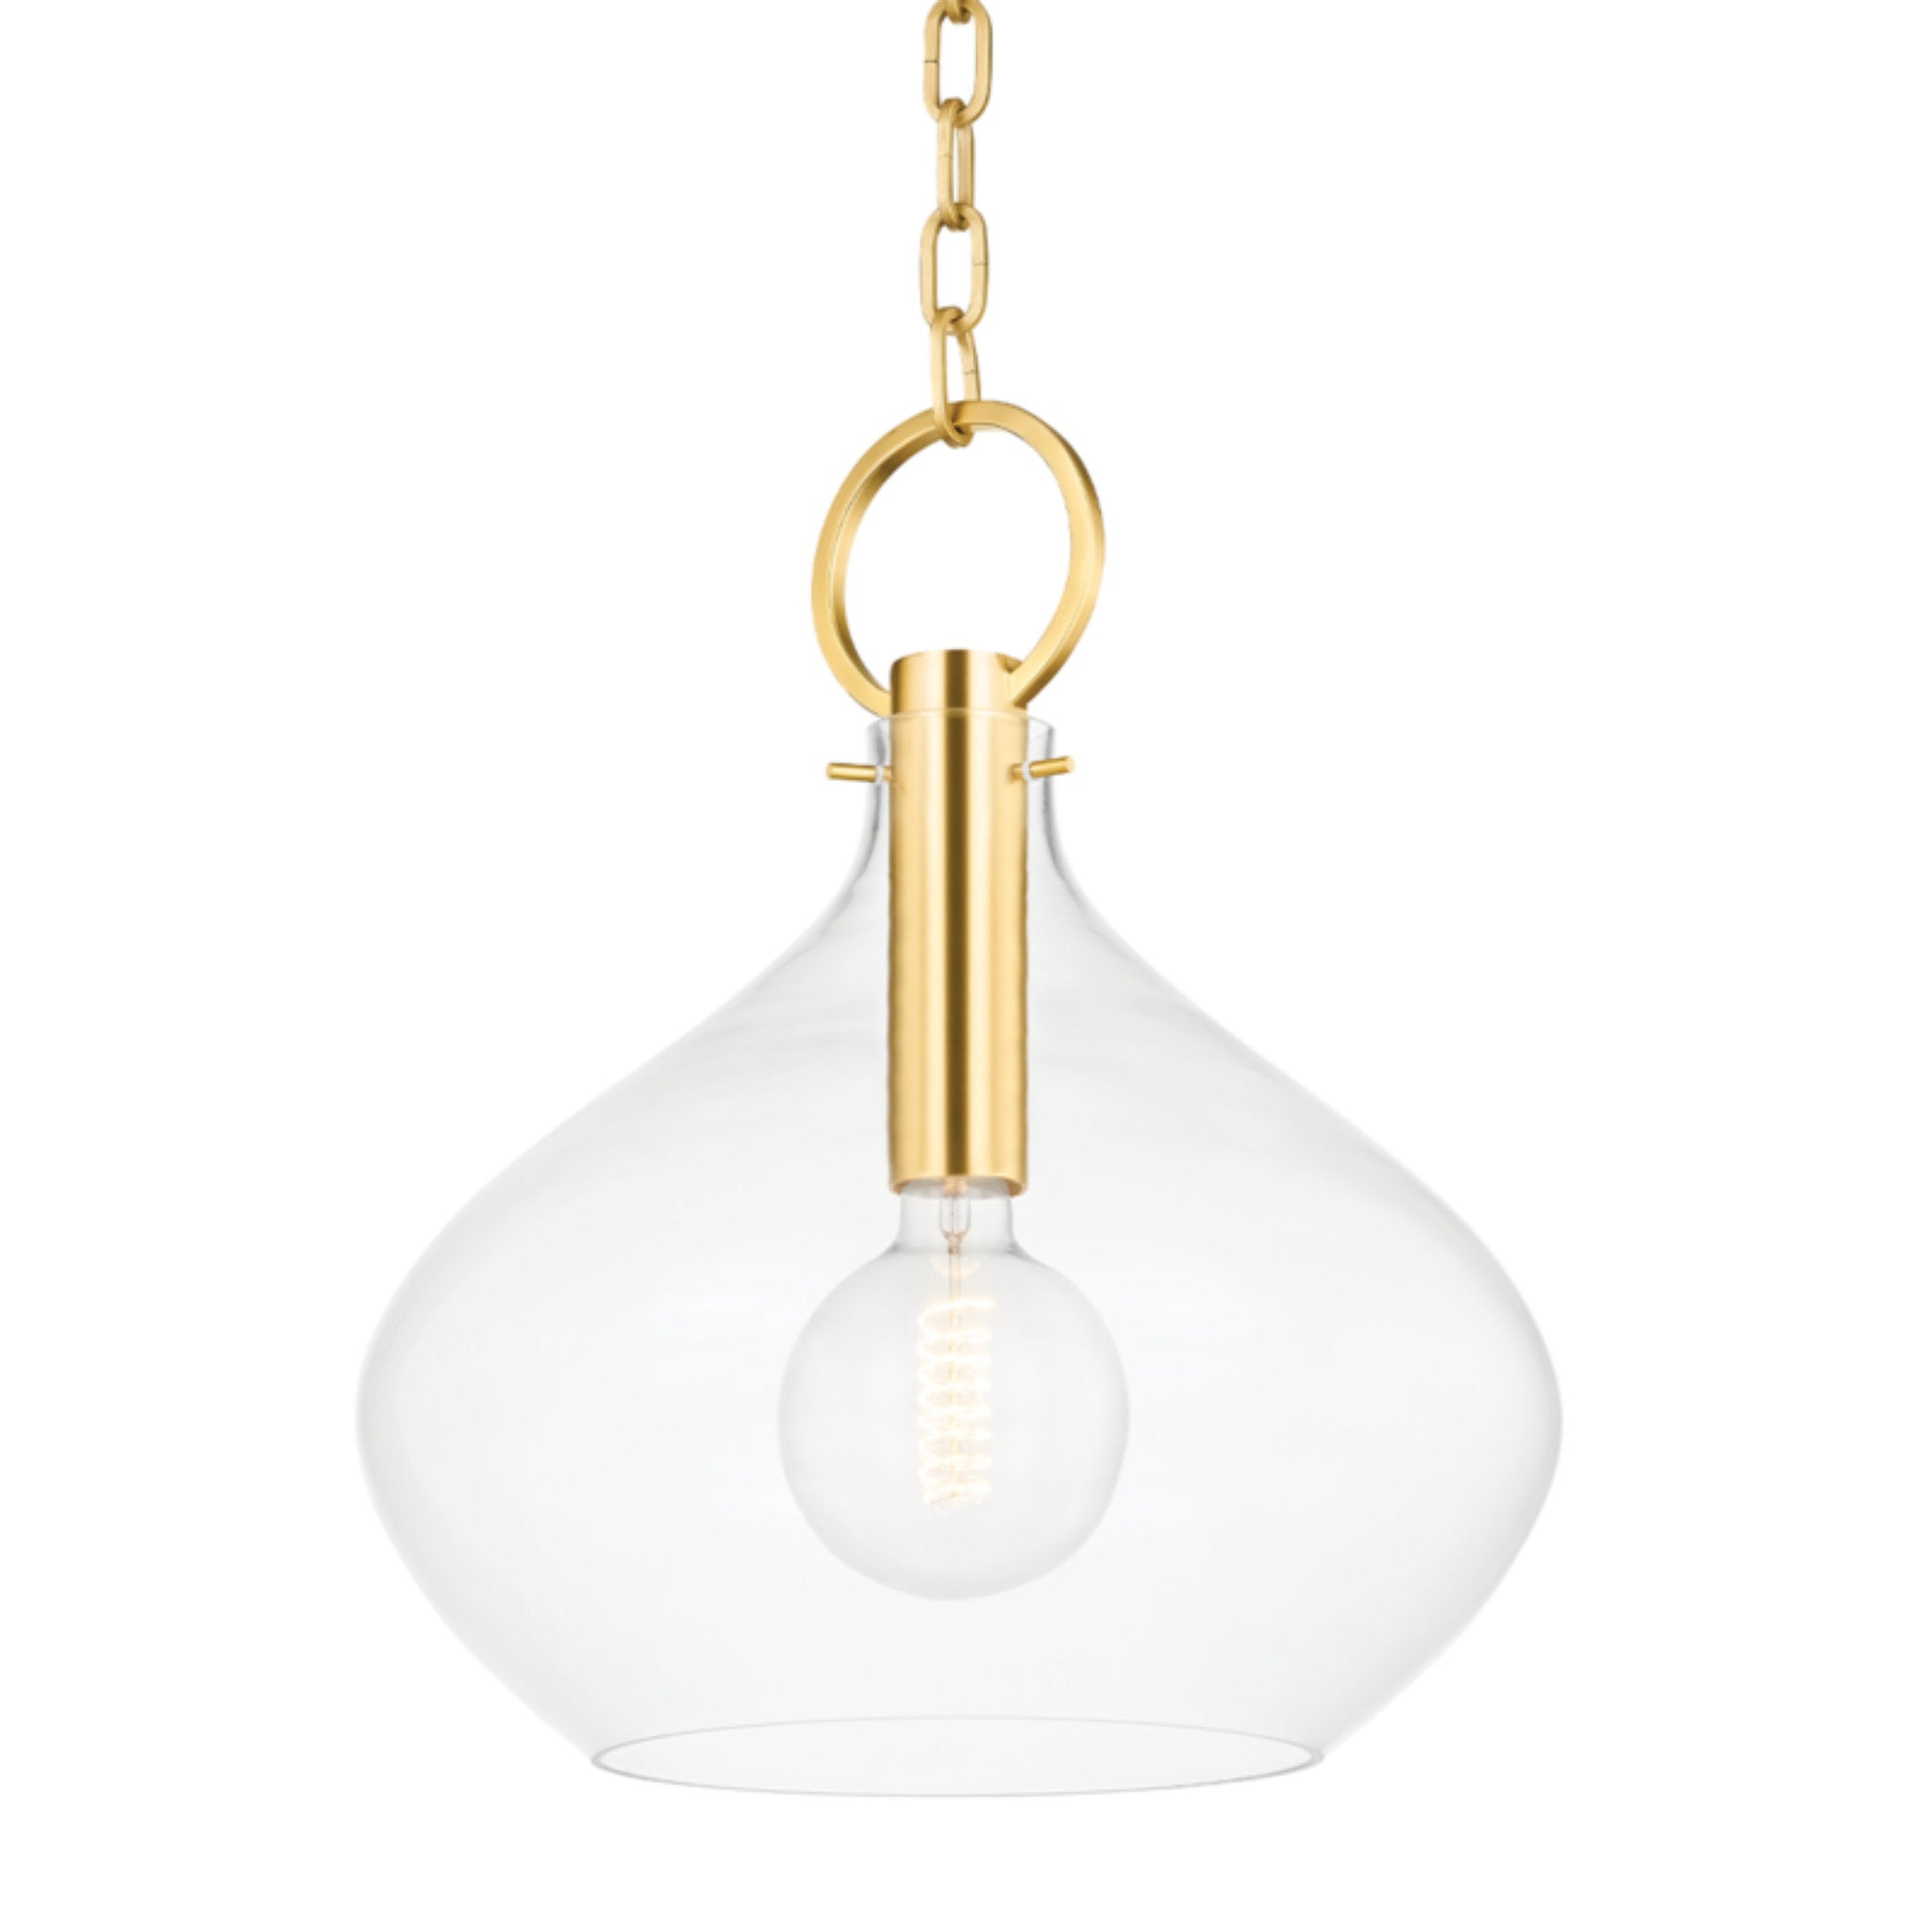 LINA 1 Light Pendant in Aged Brass by Becki Owens